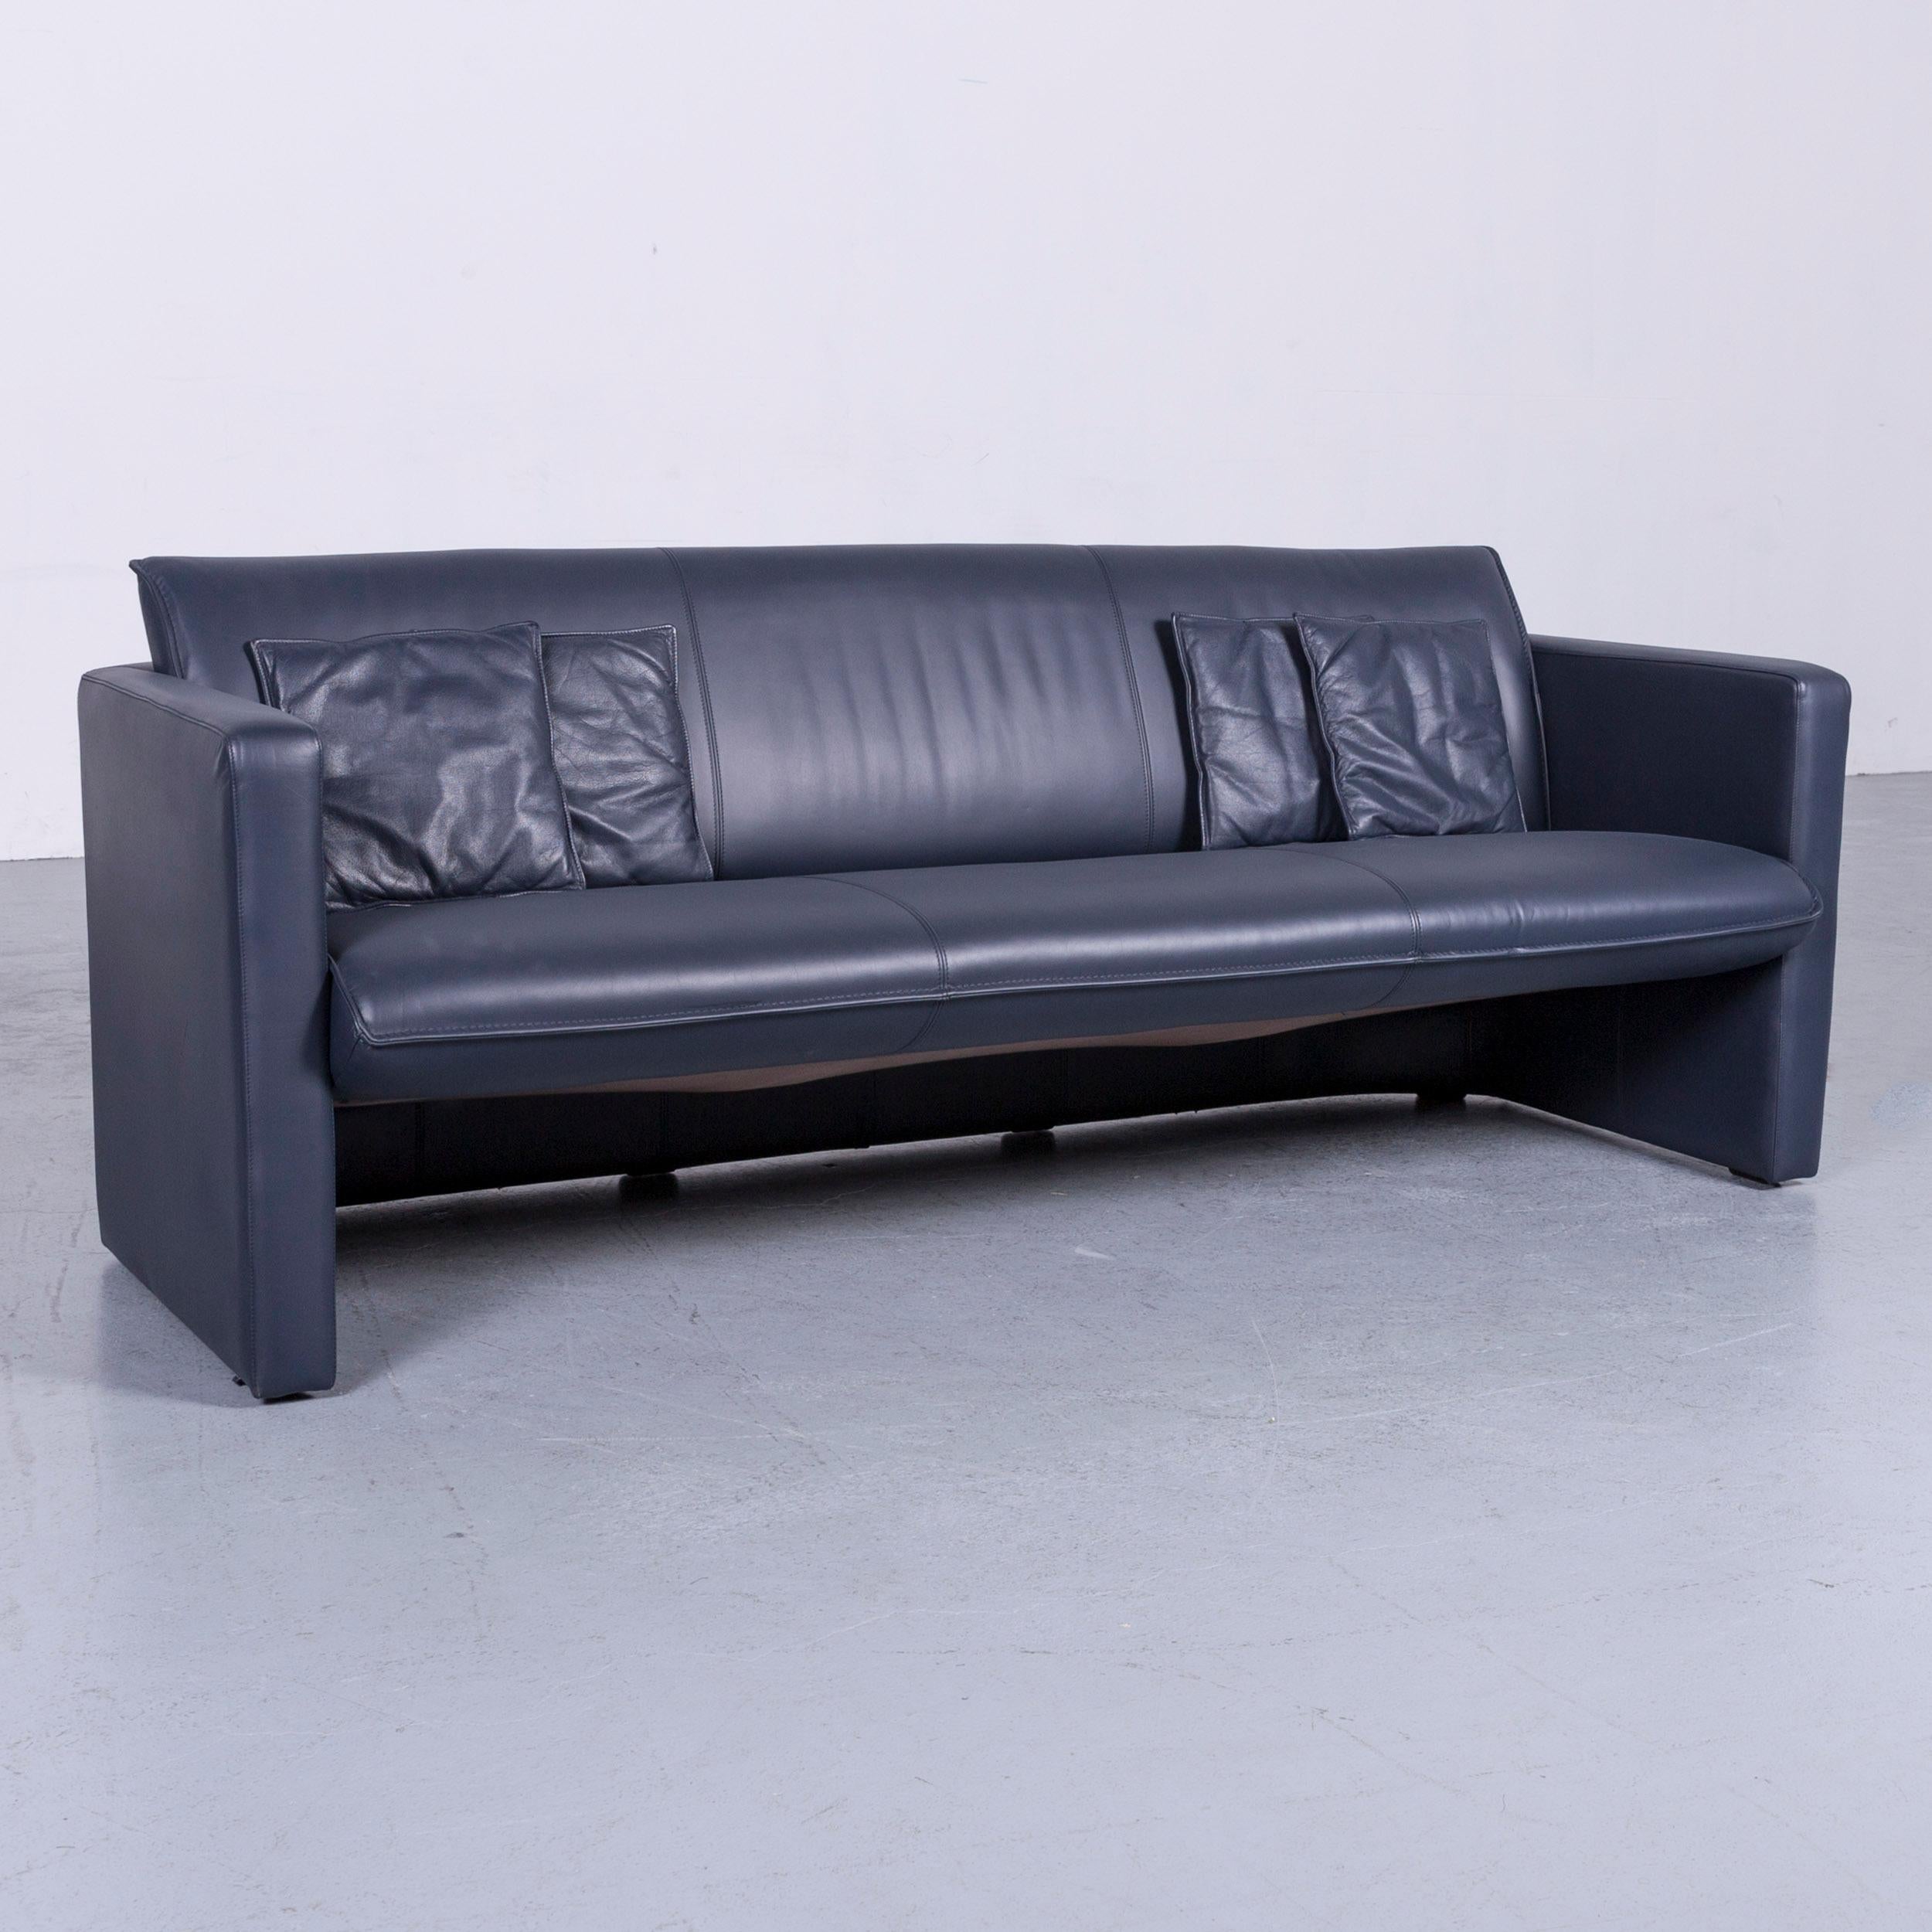 We bring to you a Leolux designer sofa leather blue two-seat couch modern.